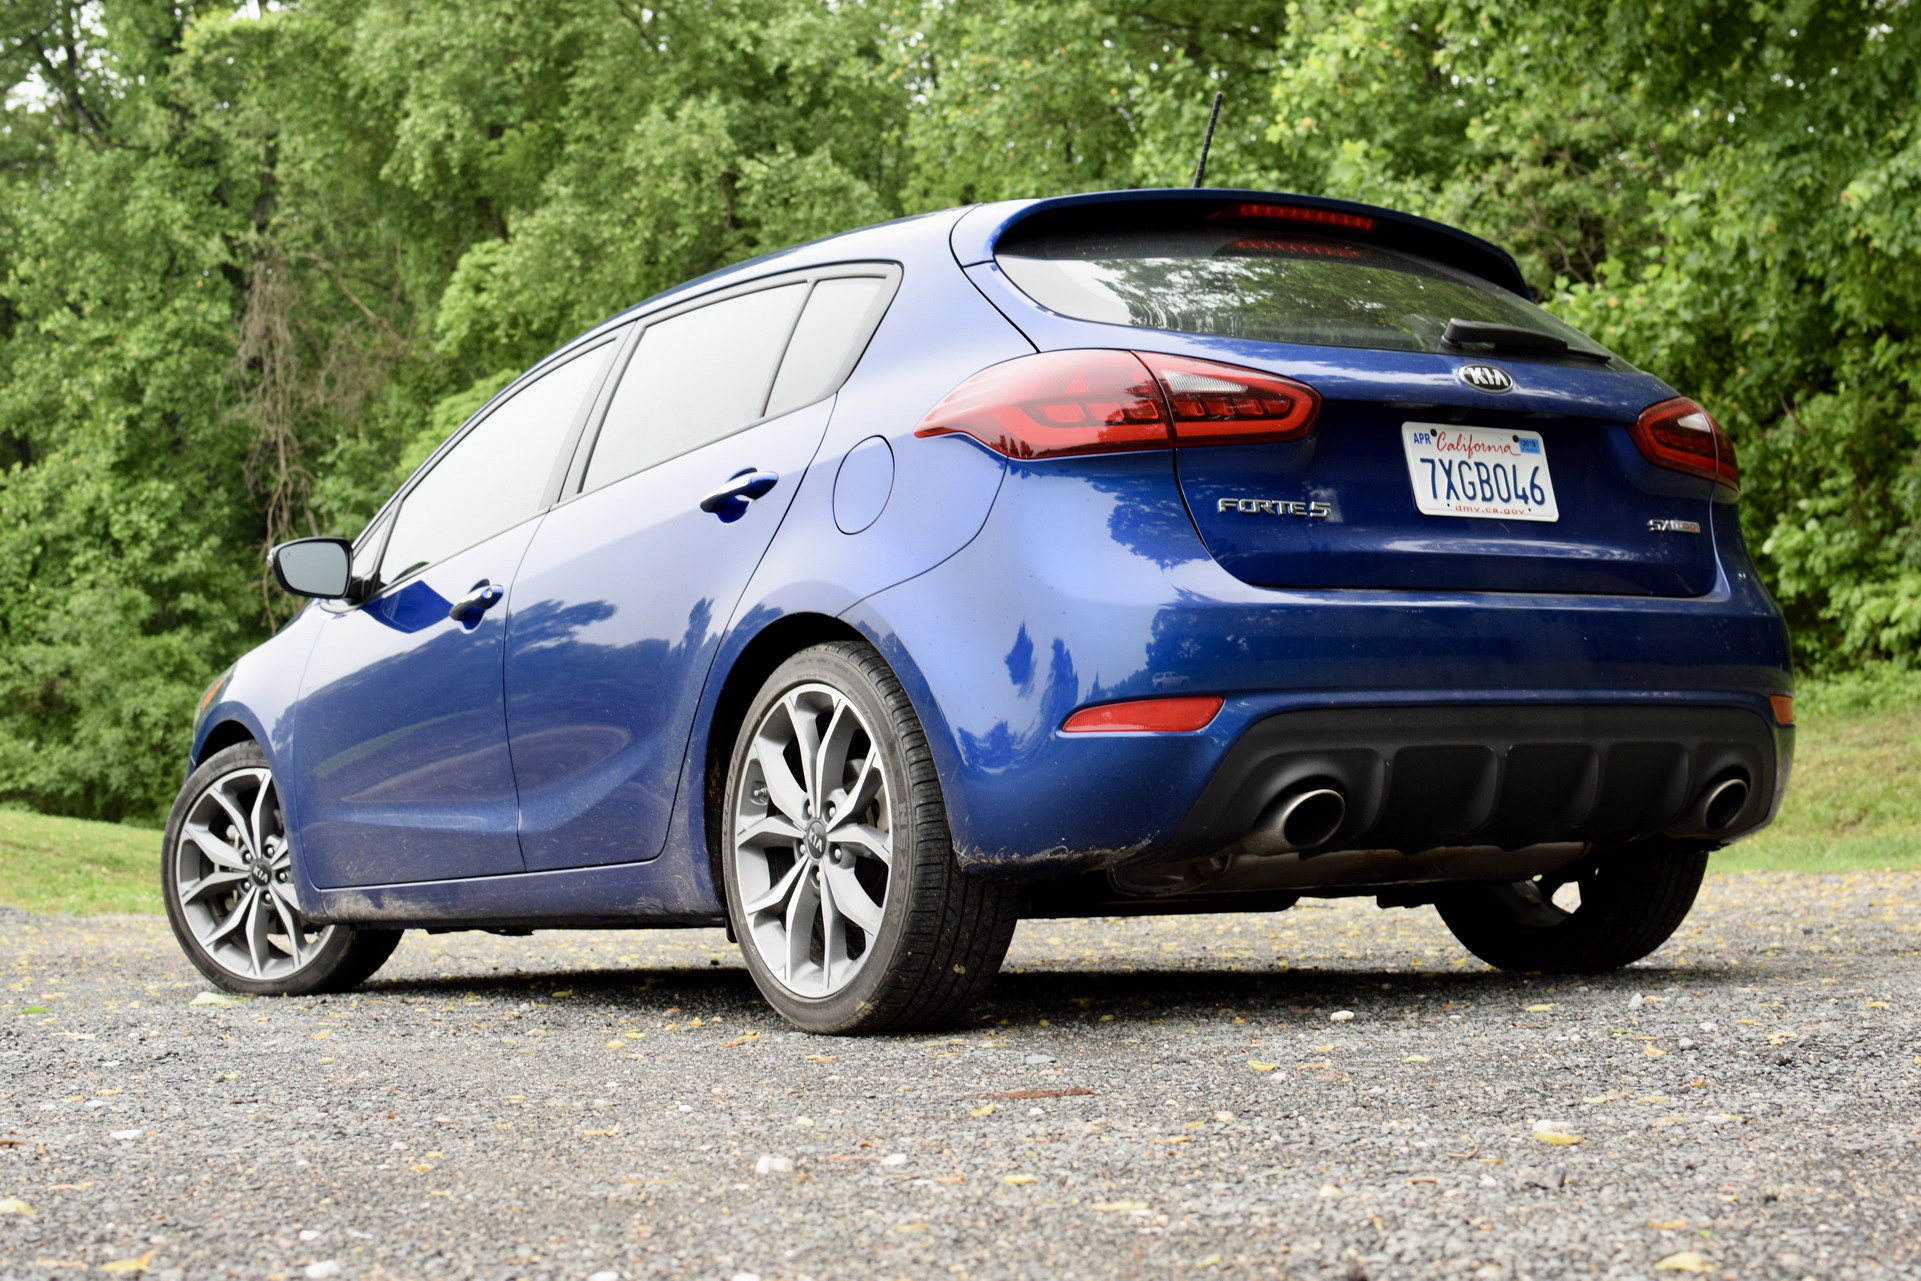 Review: 2018 Kia Forte5 SX With 201HP Turbo Is Not A Hot Hatch, But ...